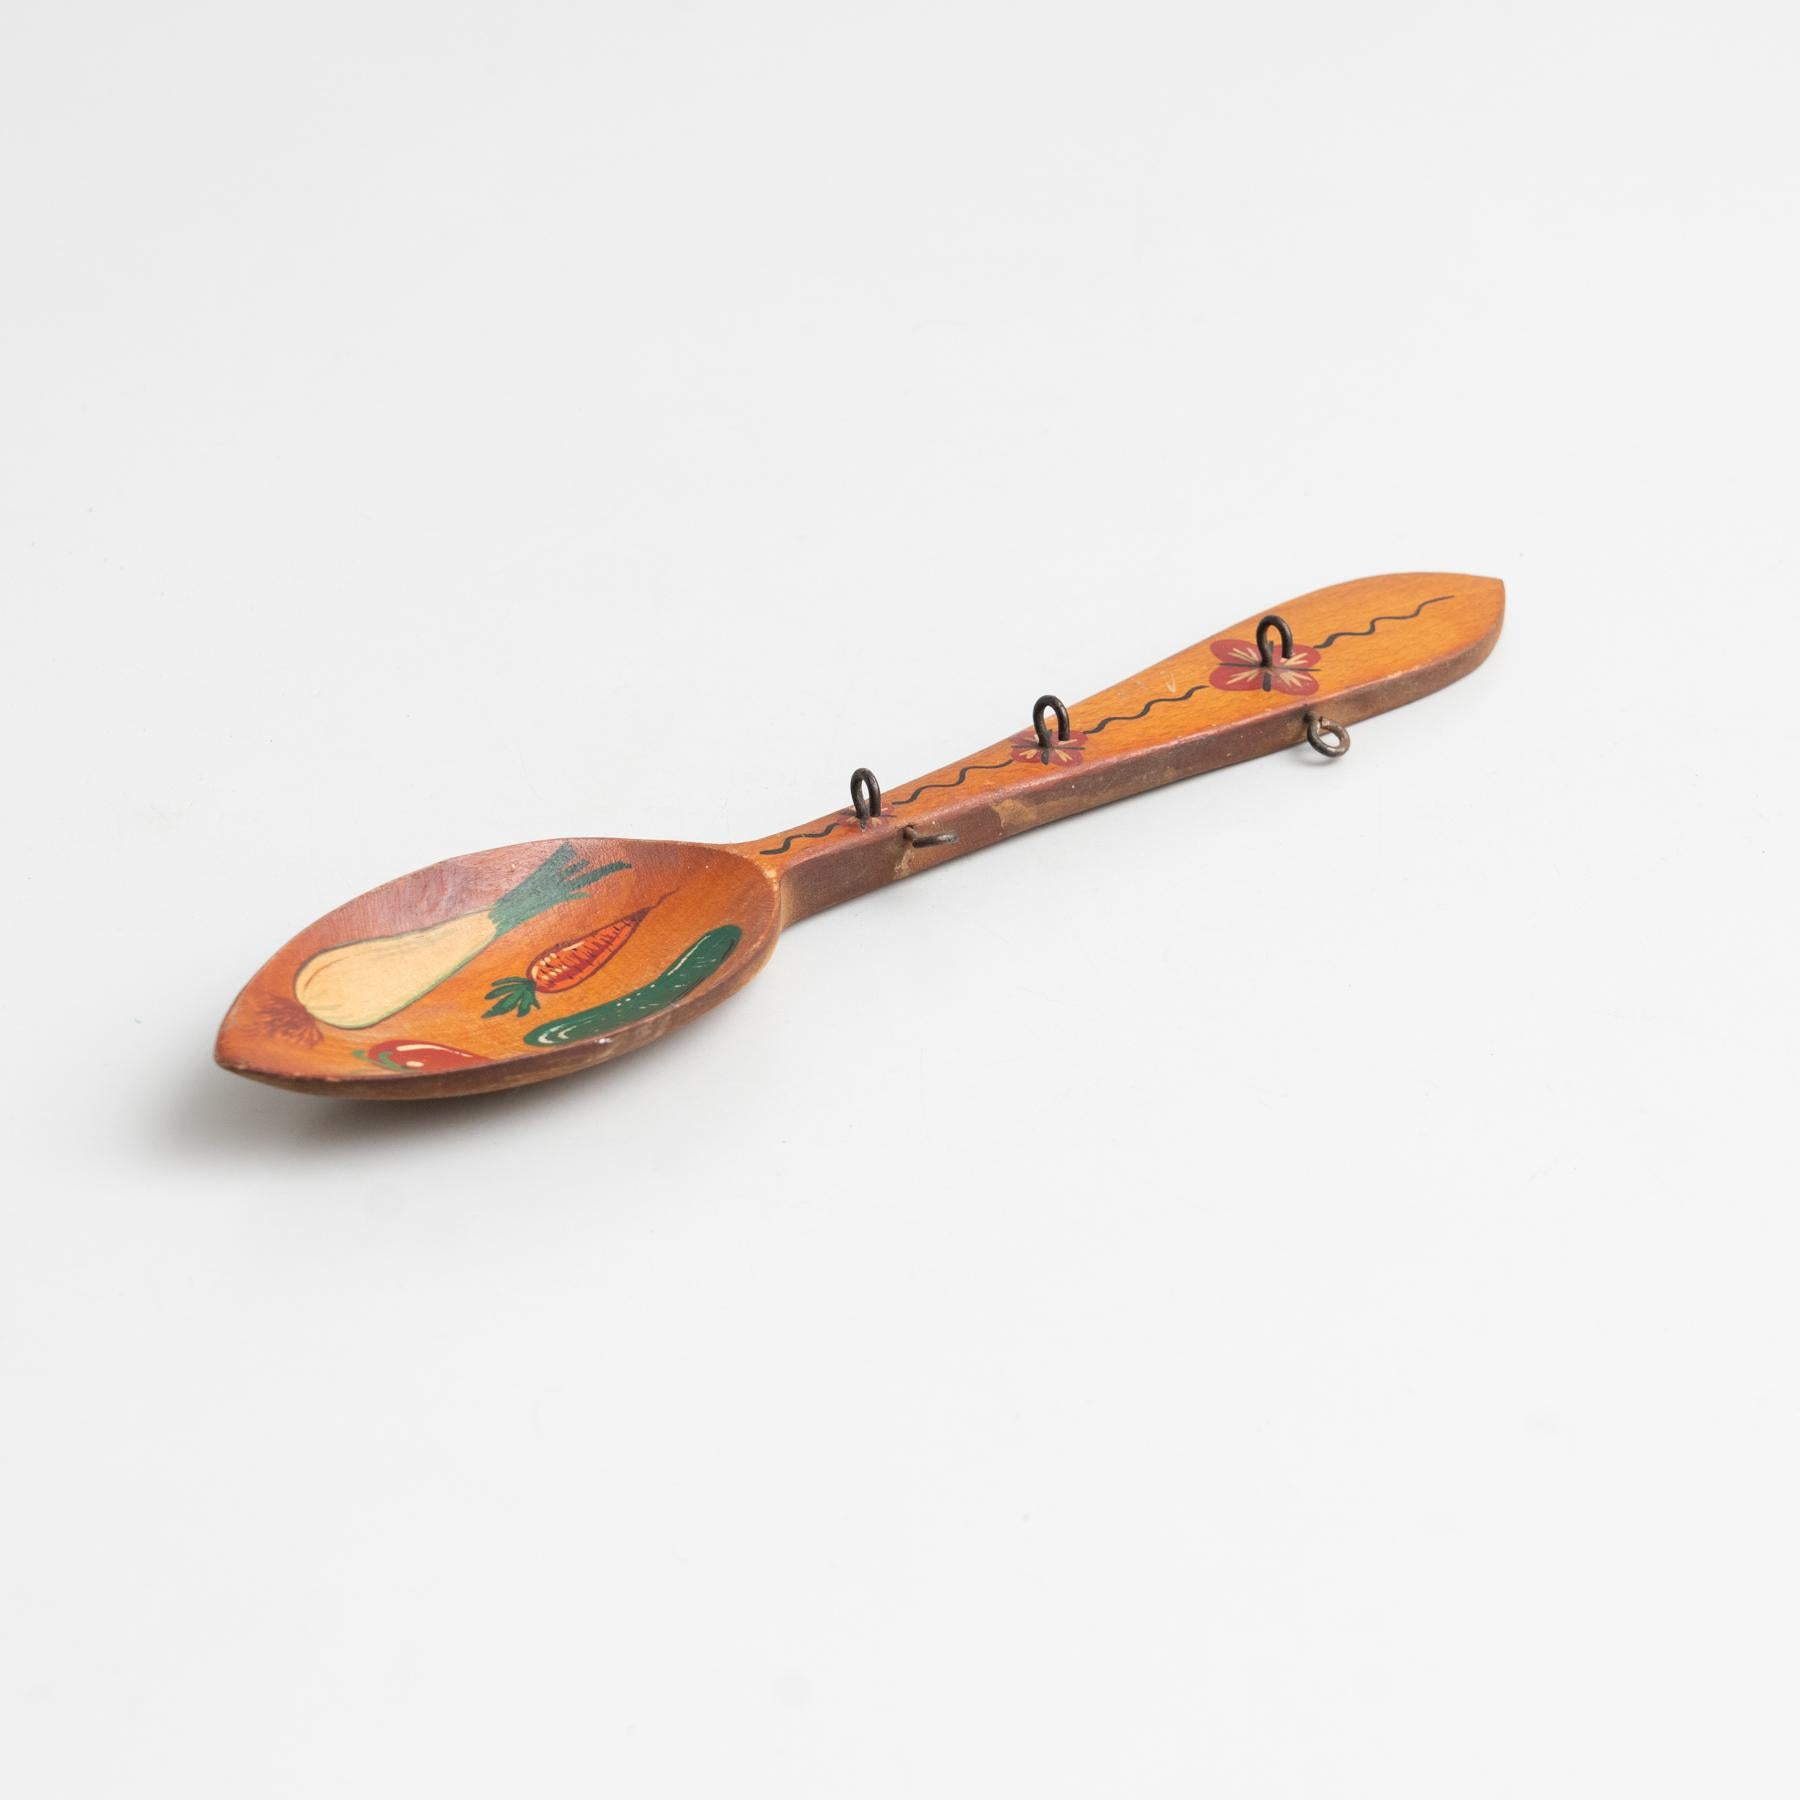 Traditional Rustic Wood Hand Painted Spoon Artwork from Spain, circa 1970 For Sale 5